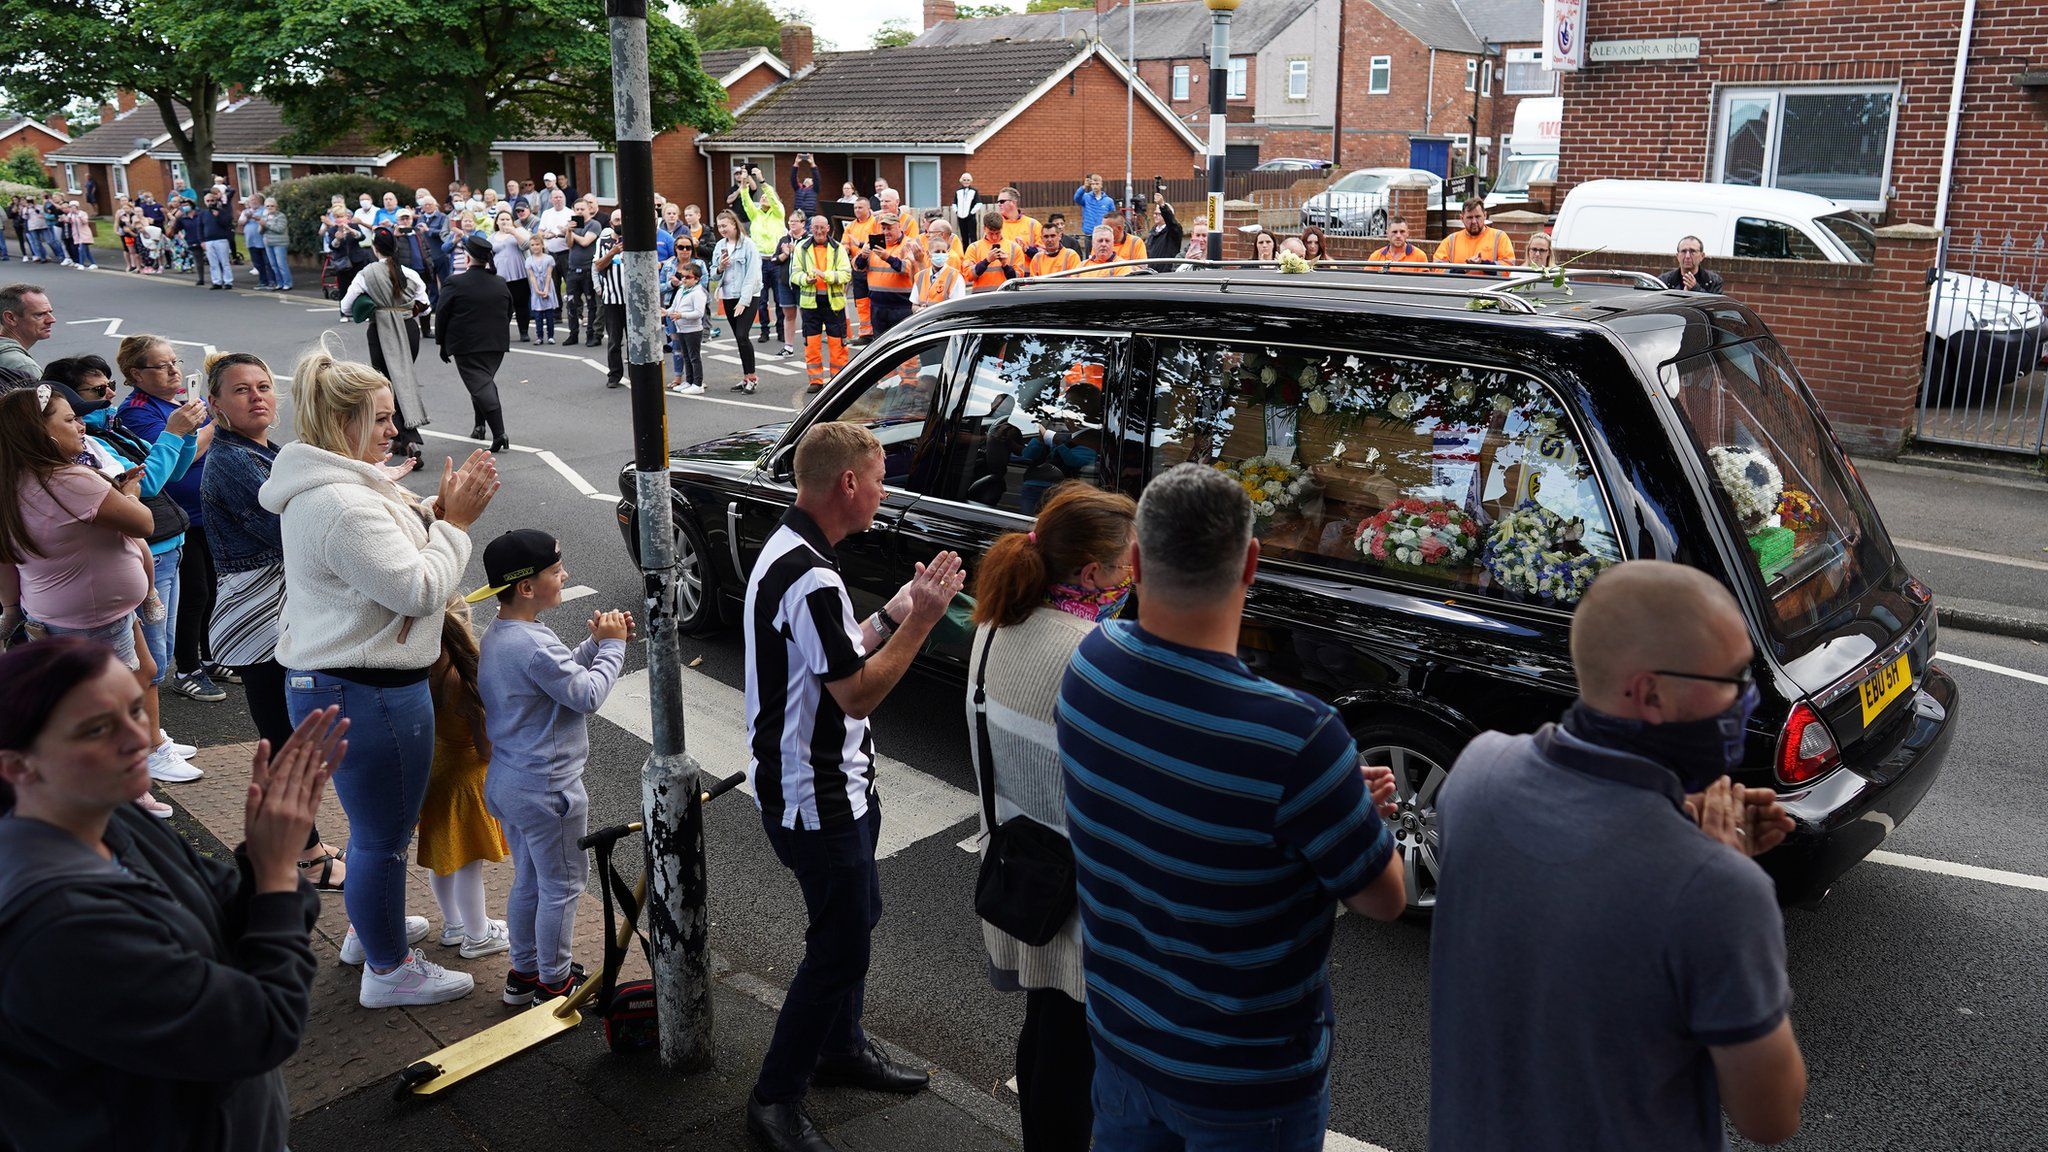 People line the streets as the funeral cortege of Jack Charlton passes through his hometown of Ashington